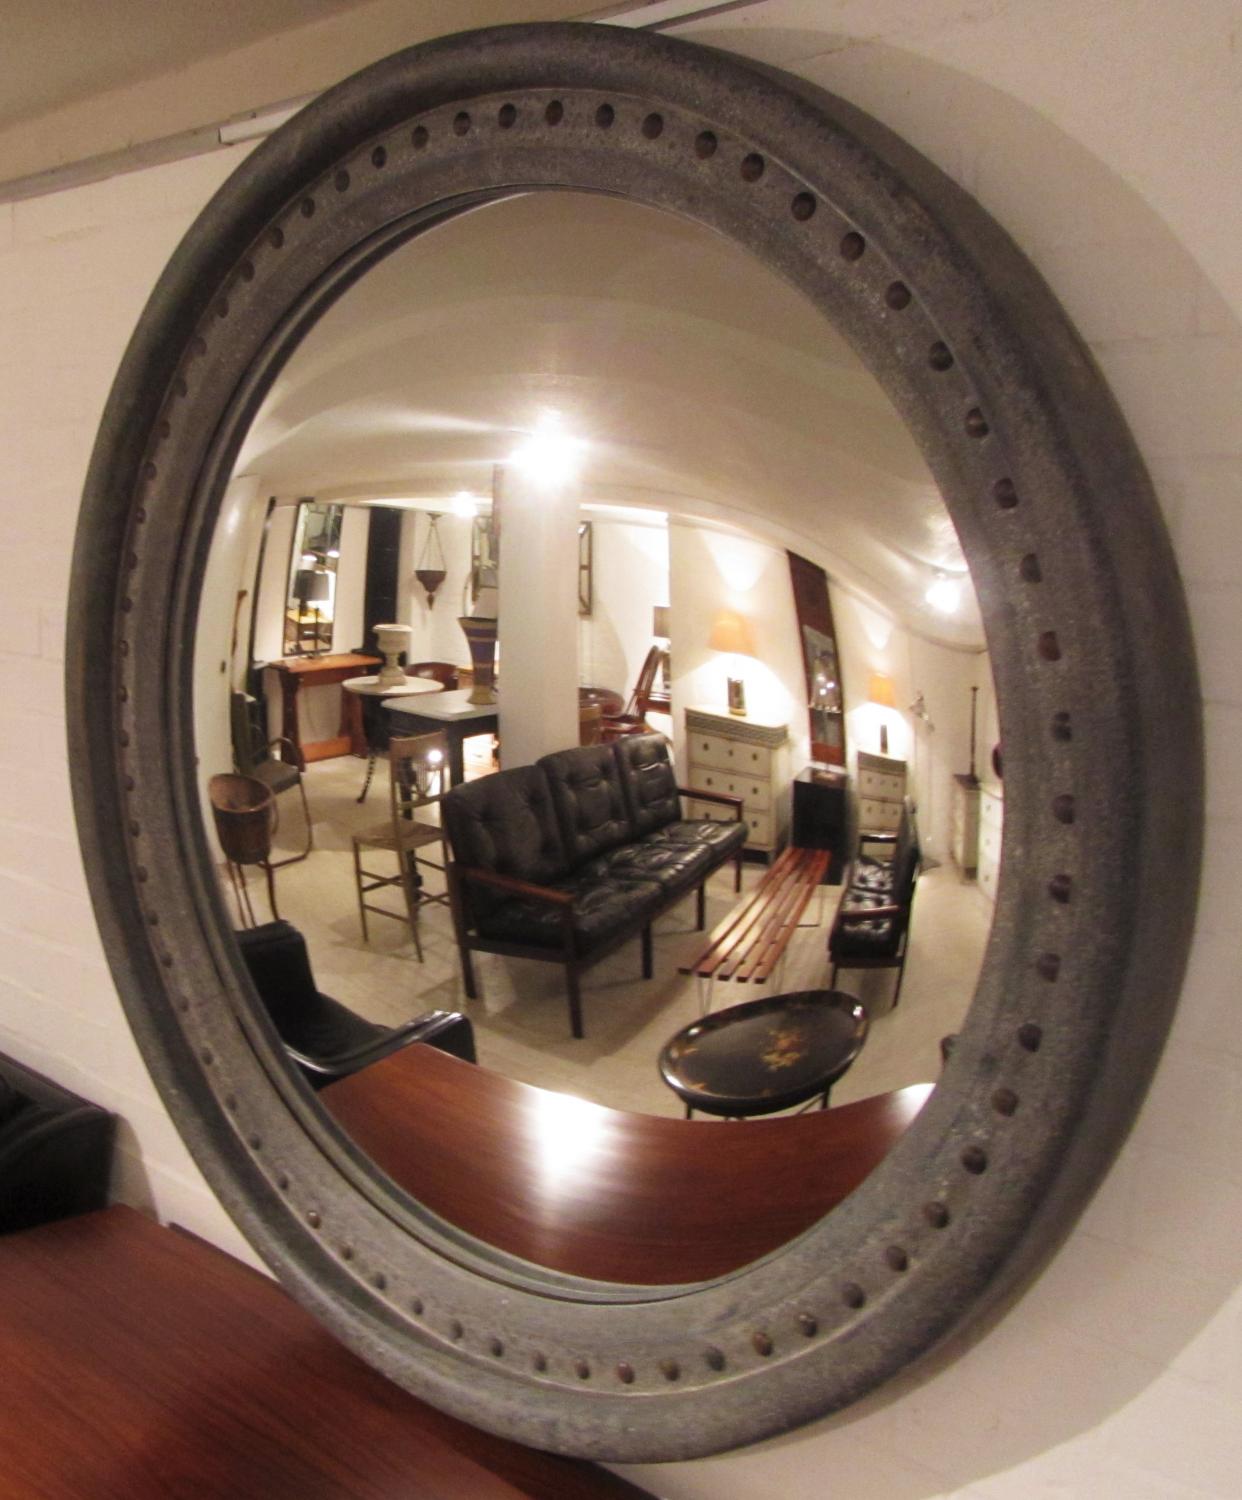 A Very Large Convex Mirror, Extra Large Round Convex Mirror